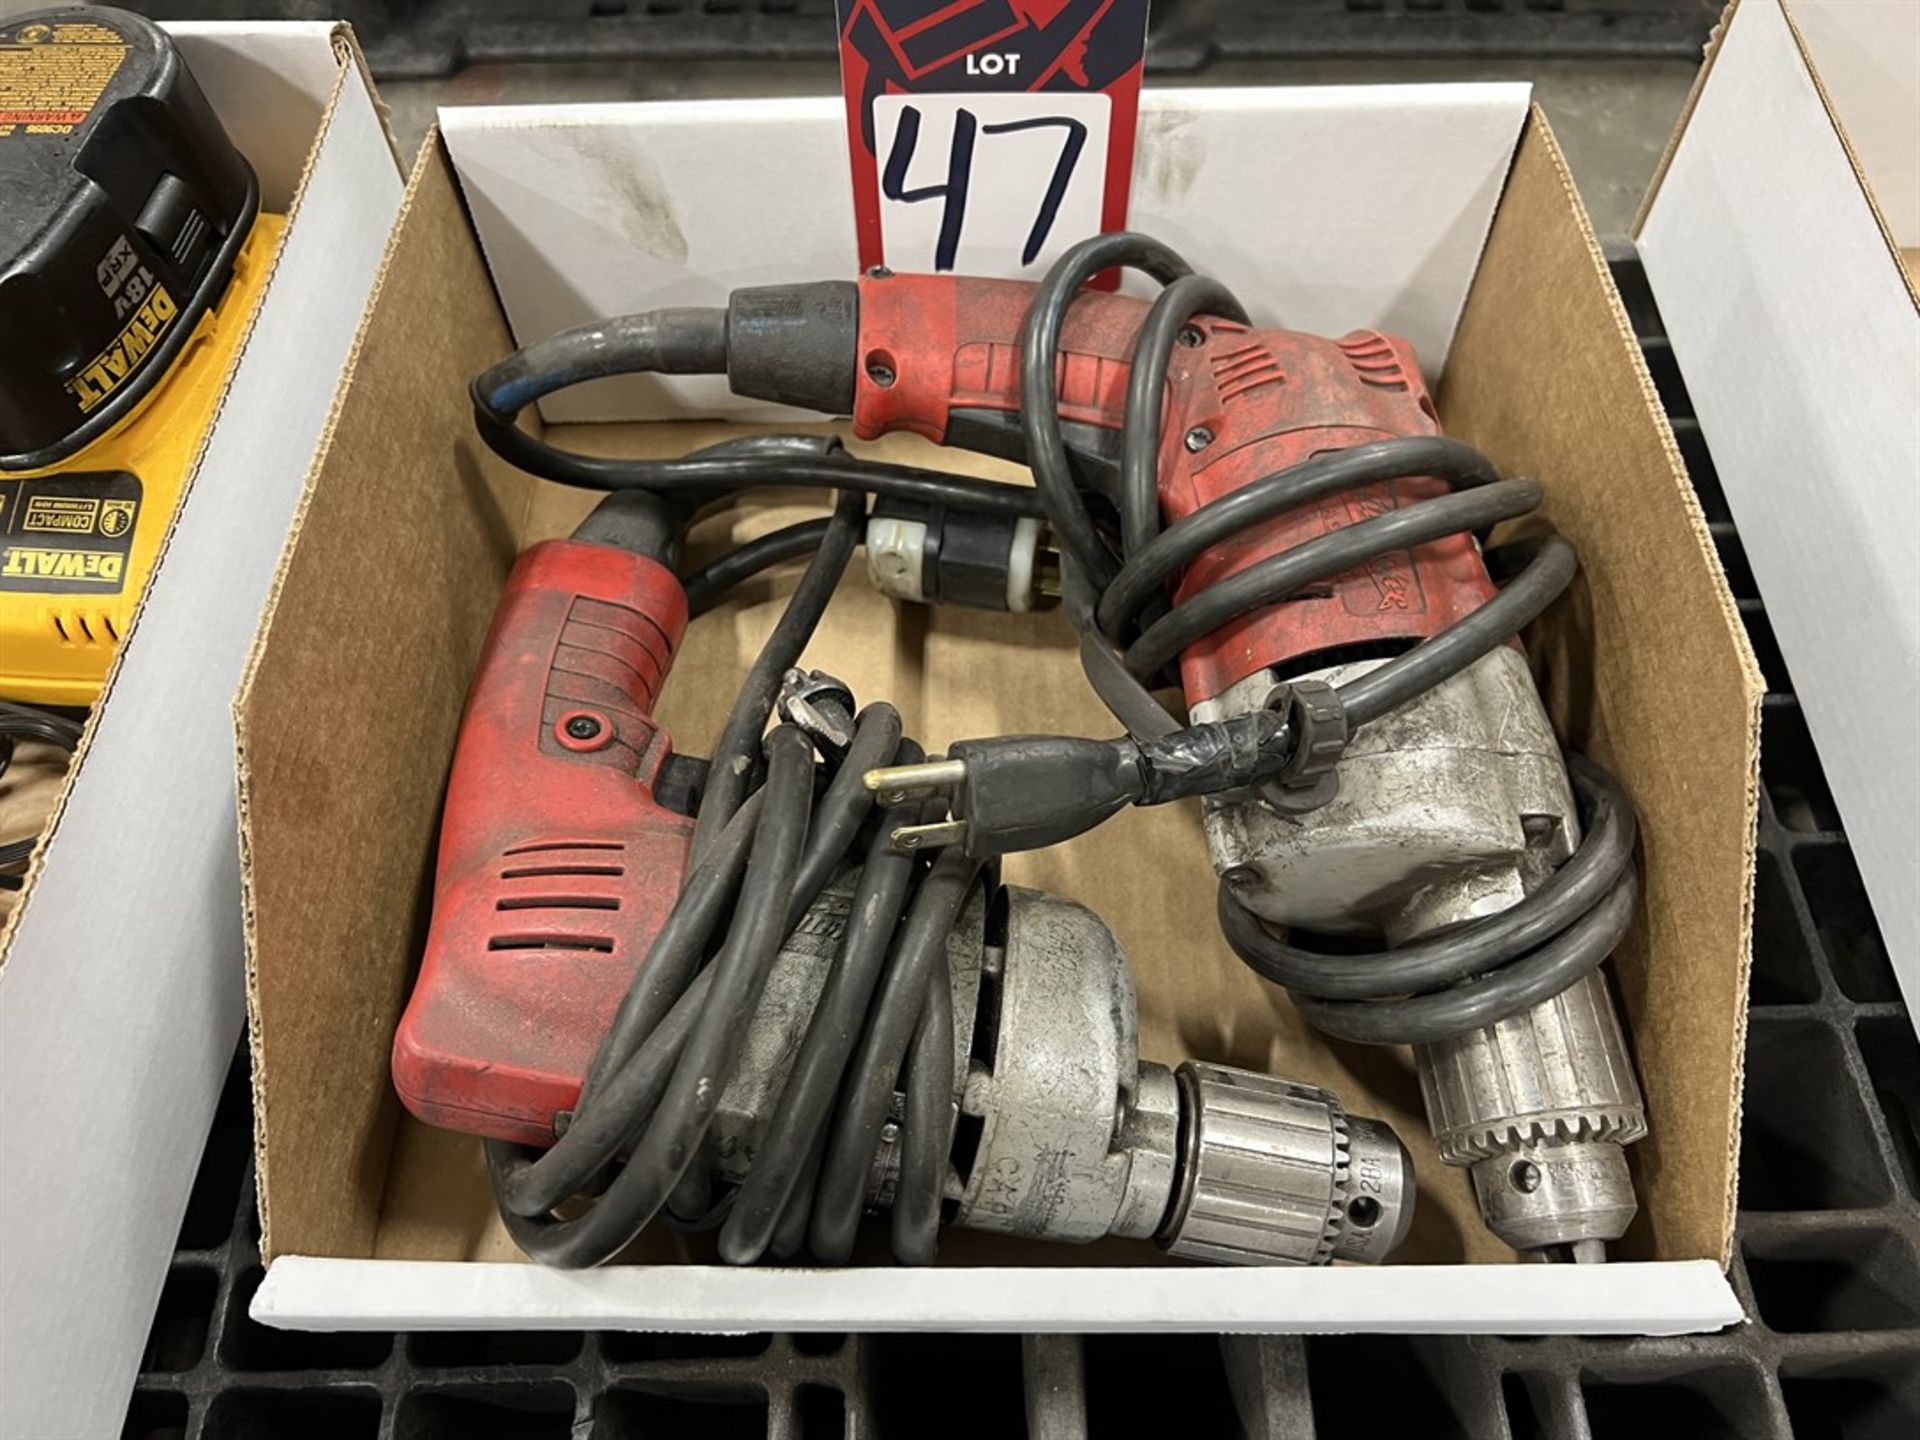 Lot Comprising (2) MILWAUKEE 1/2" Hole Shooter Drills